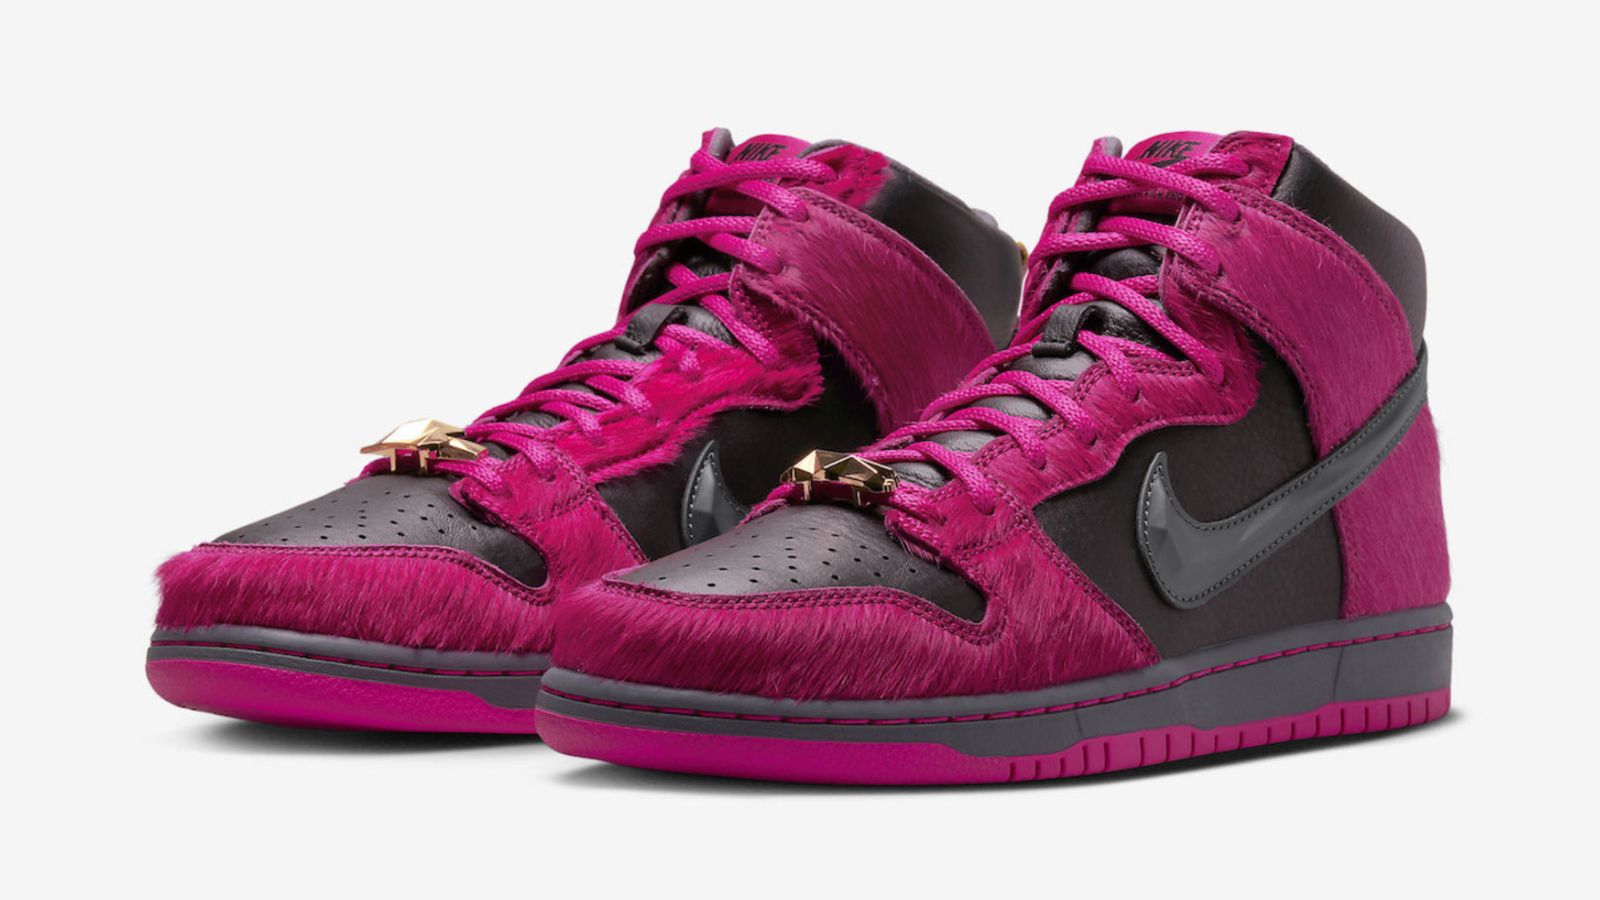 Run The Jewels x Nike SB Dunk High "Active Pink Black" product image of a black pair of sneakers featuring pink pony-haired overlays and jewelled details.